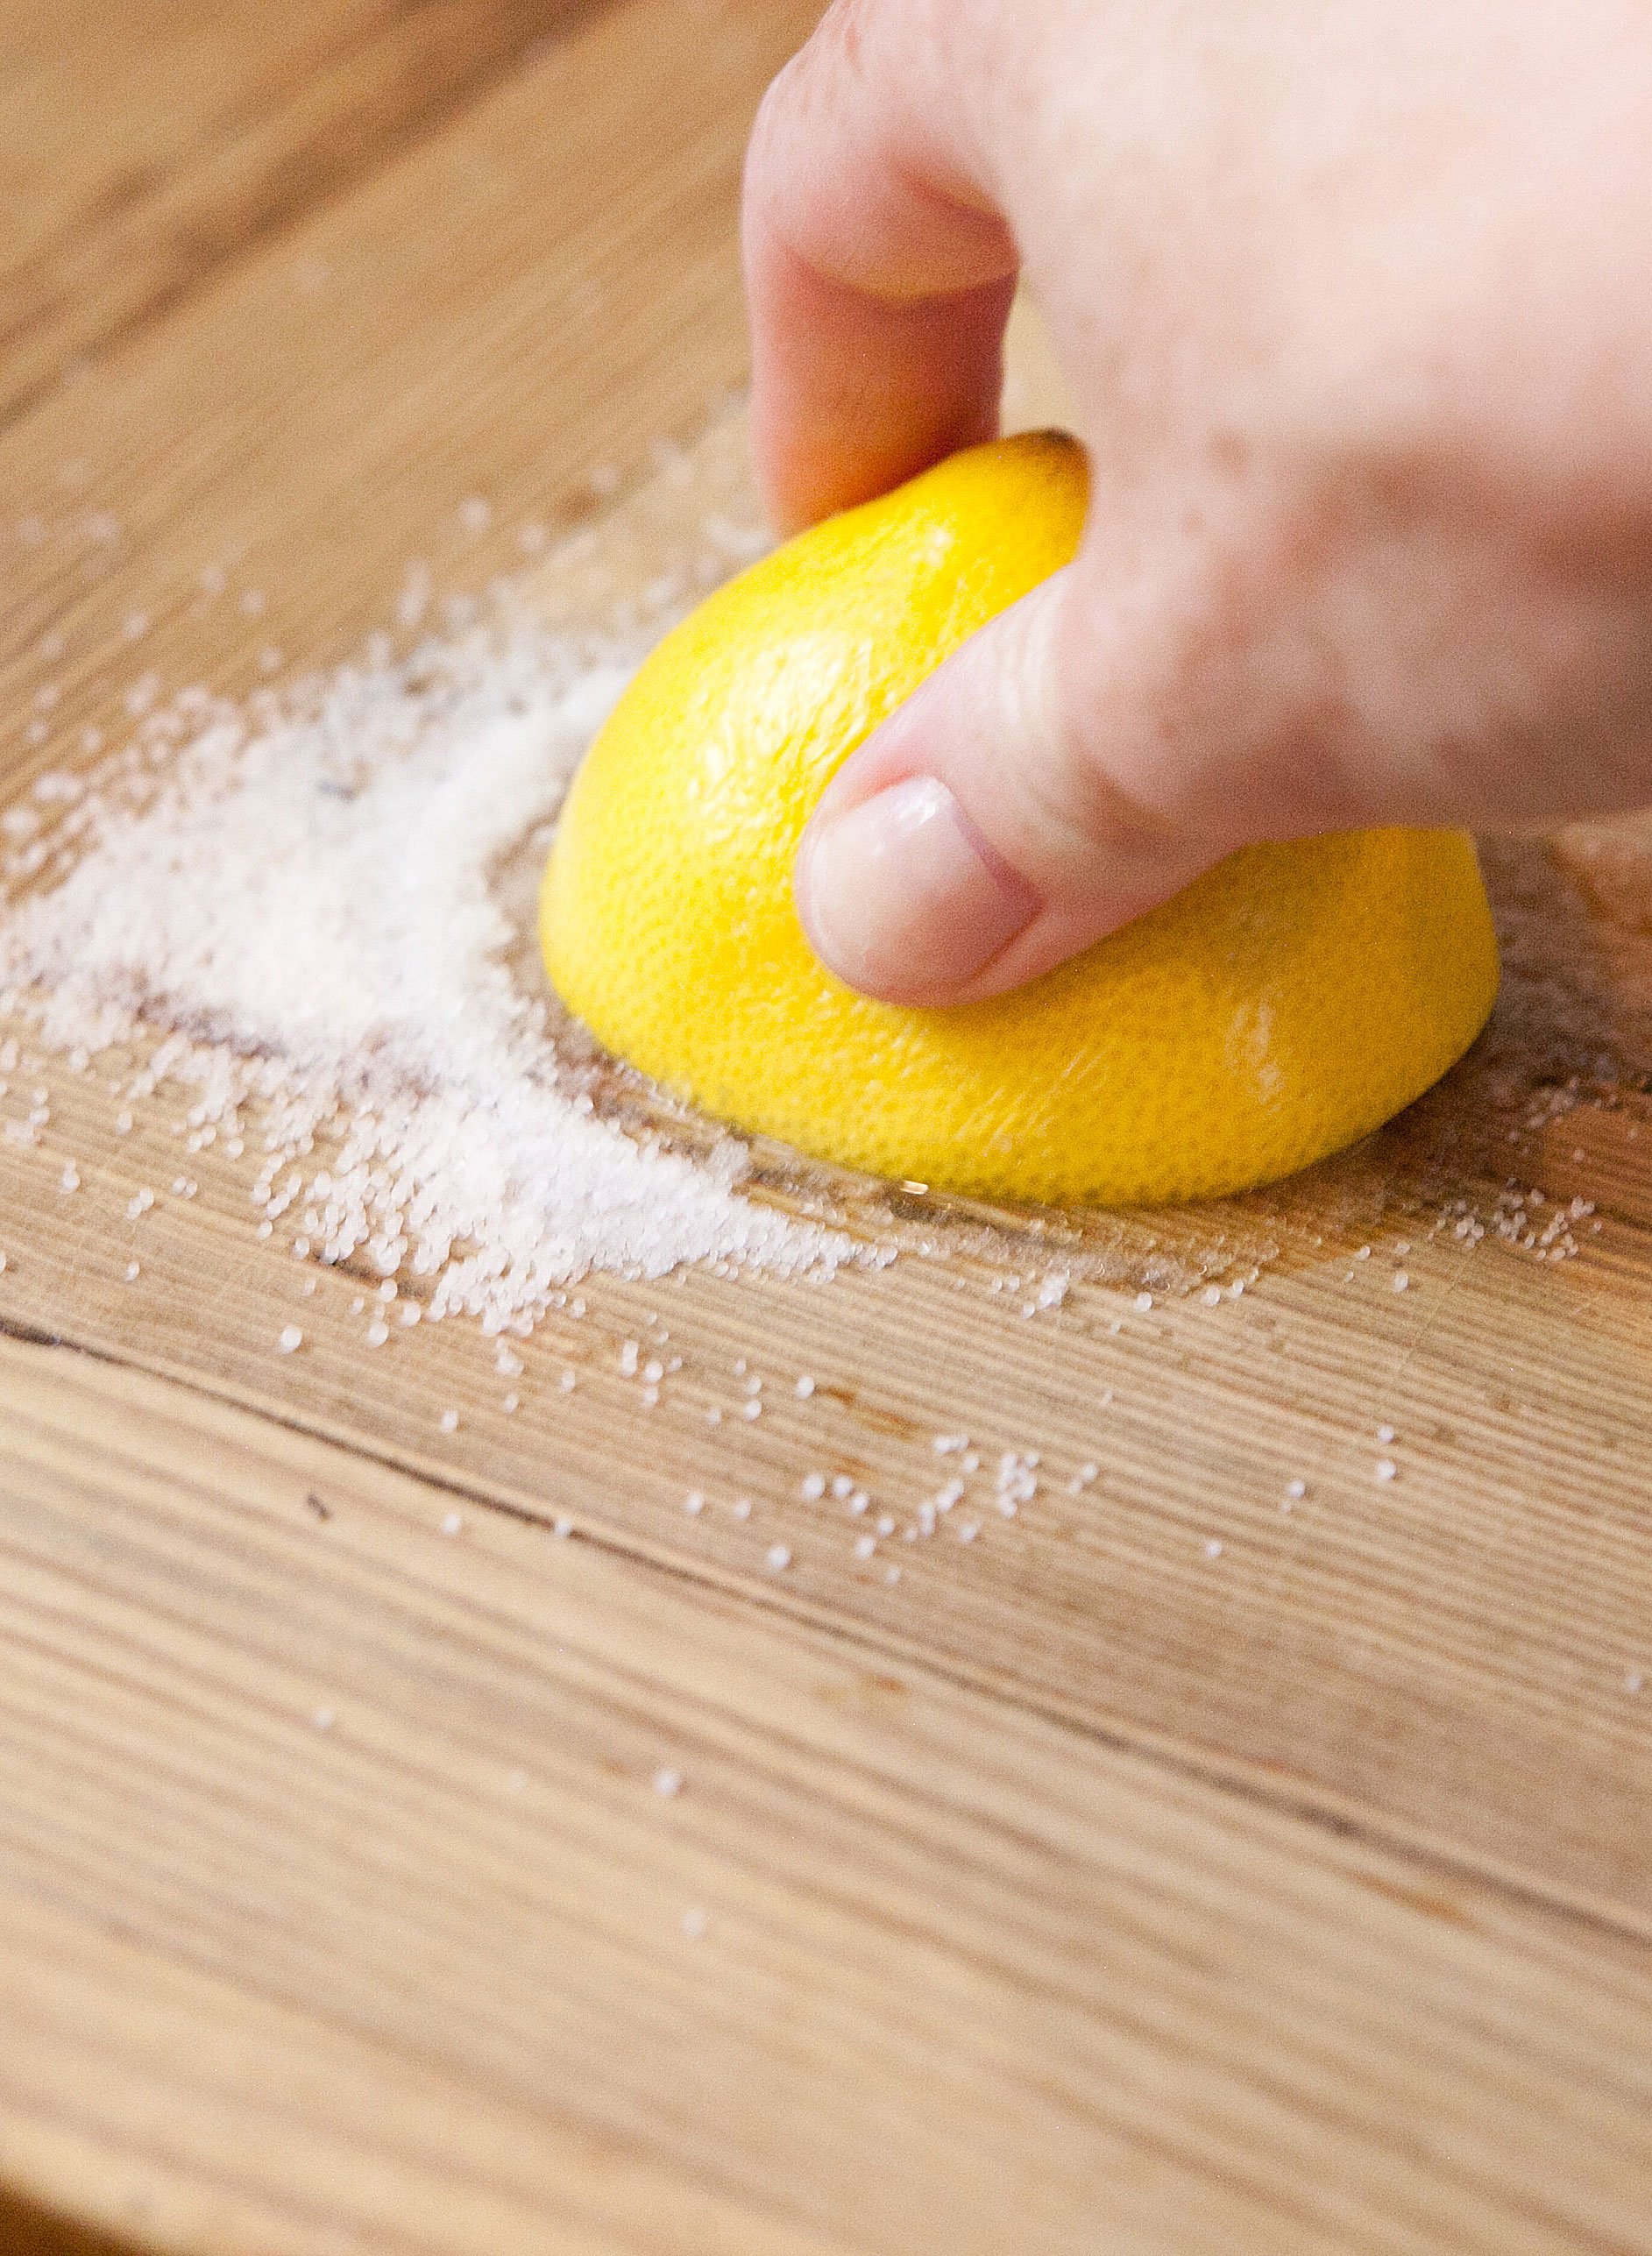 Best All-Natural Cleaning Tips #4: Clean your cutting boards with lemons 